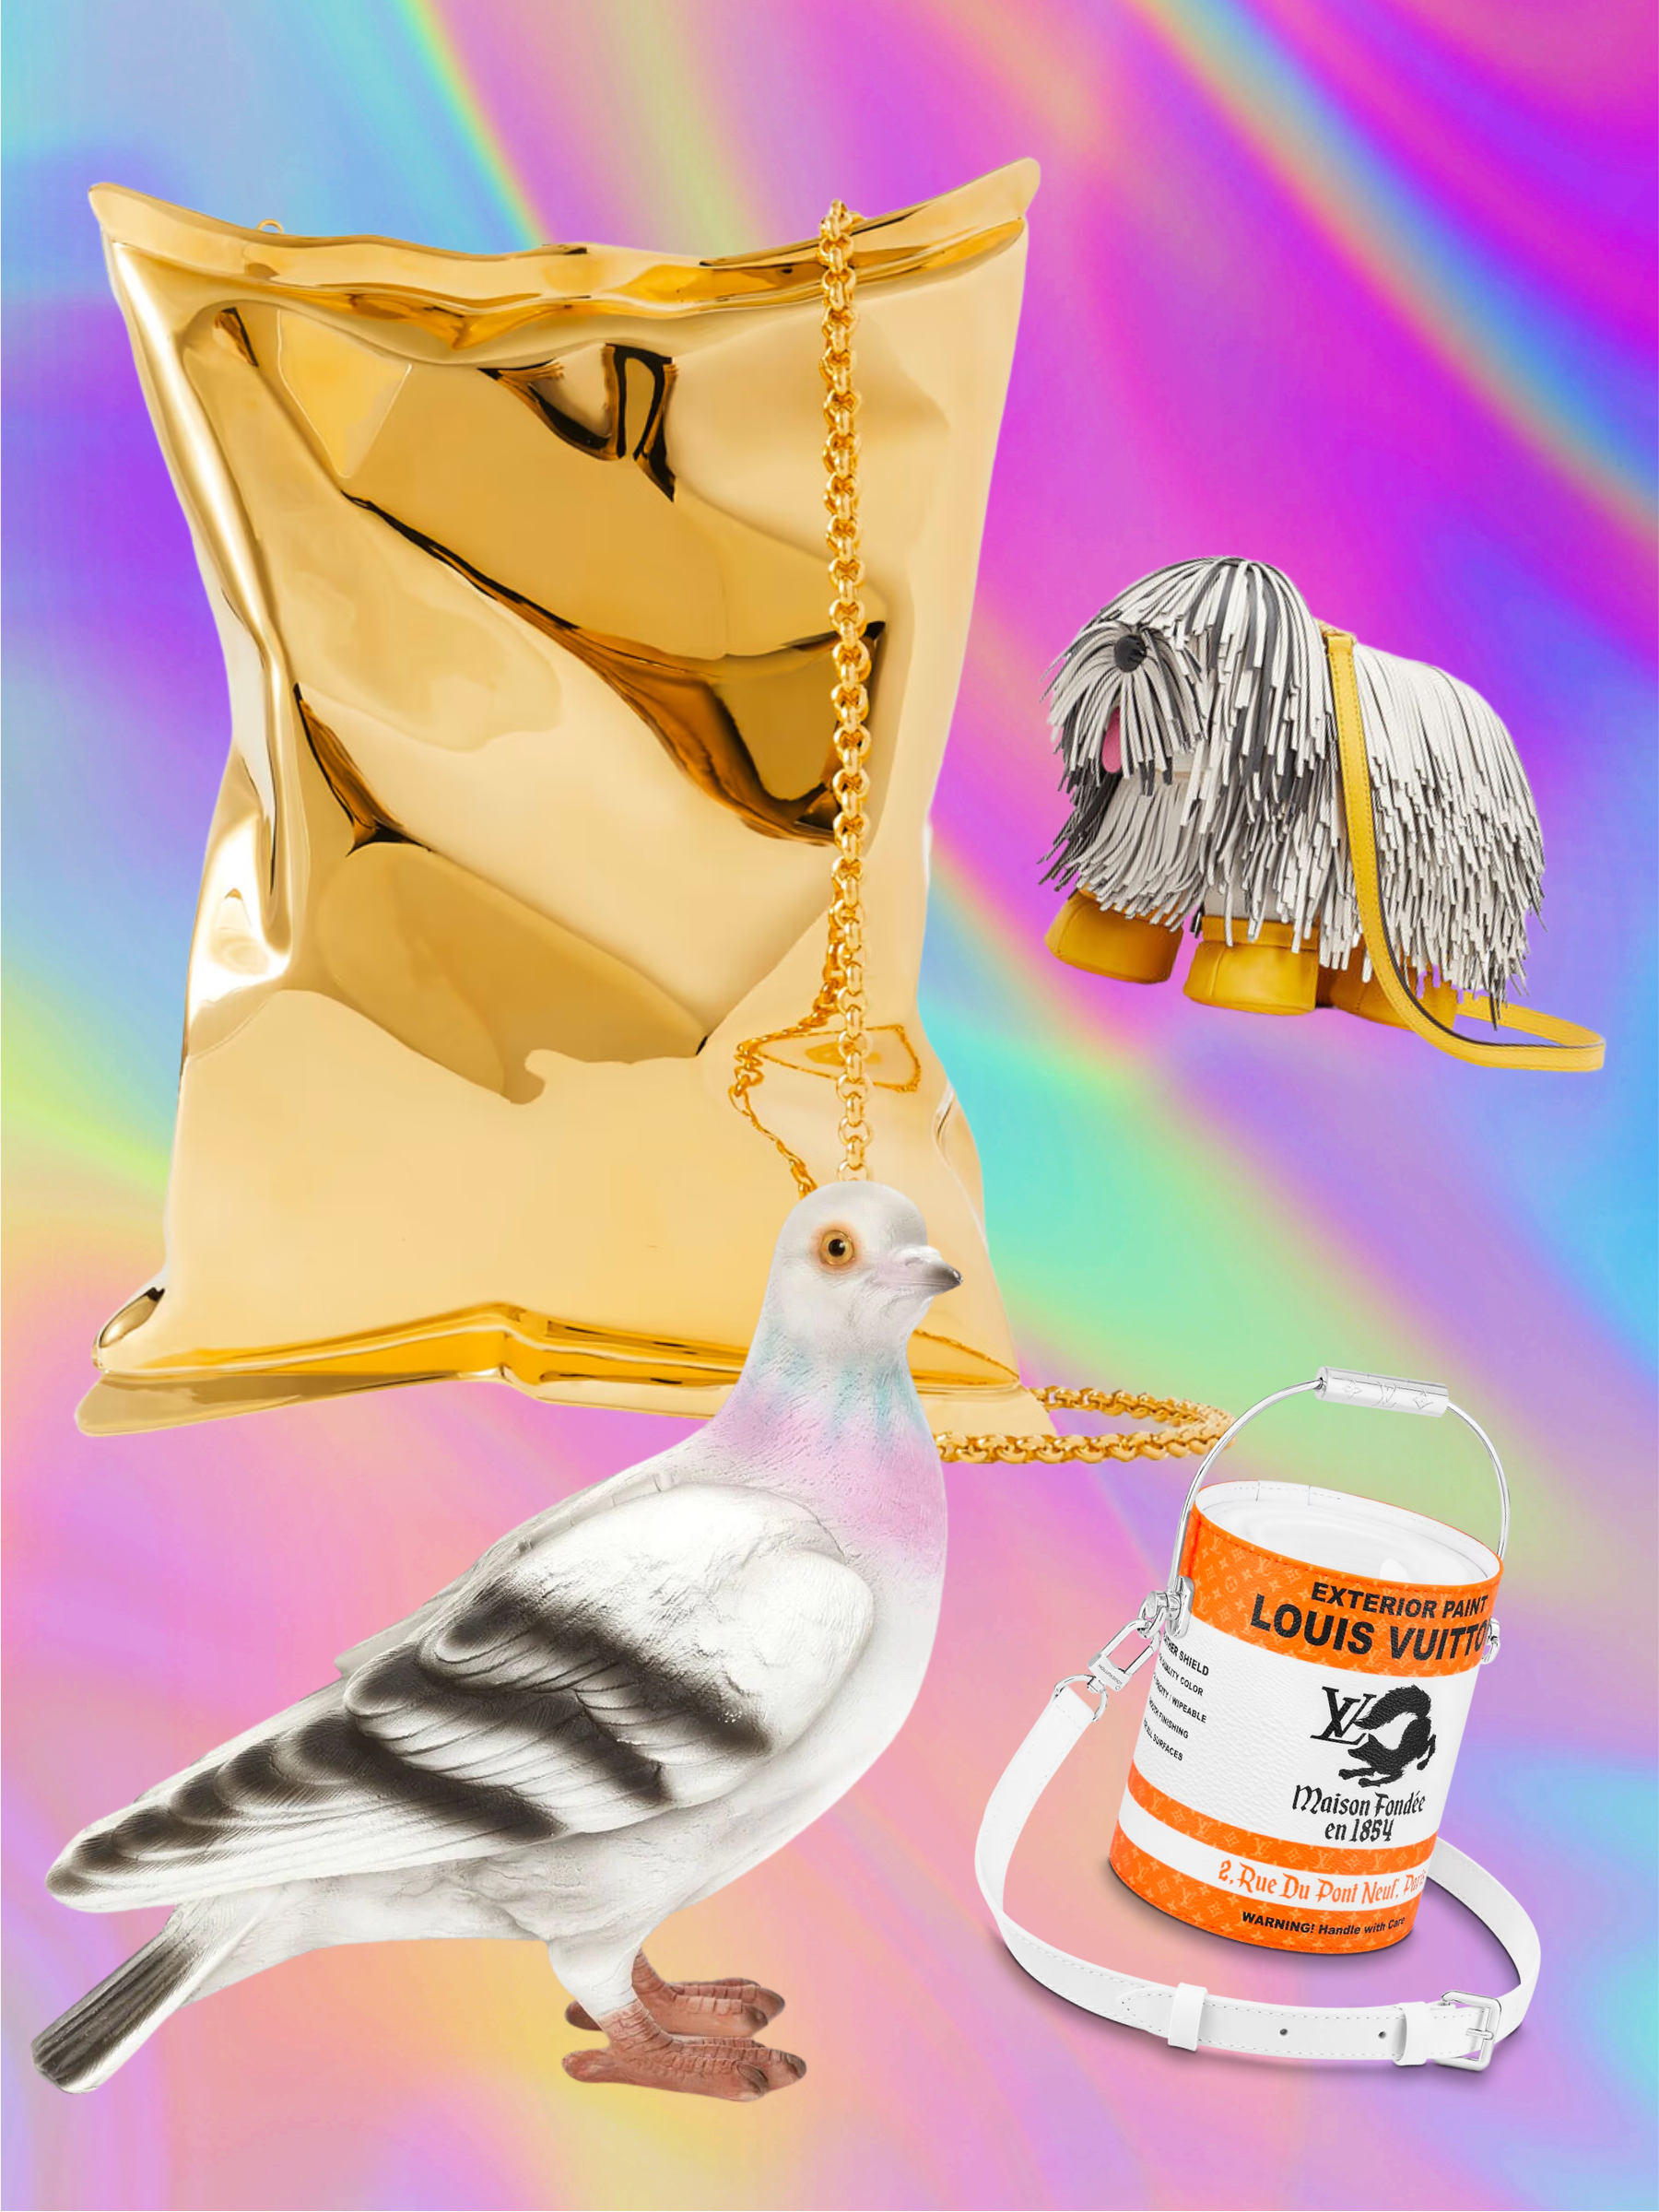 Louis Vuitton Wants You To Carry A Paint Can Bag